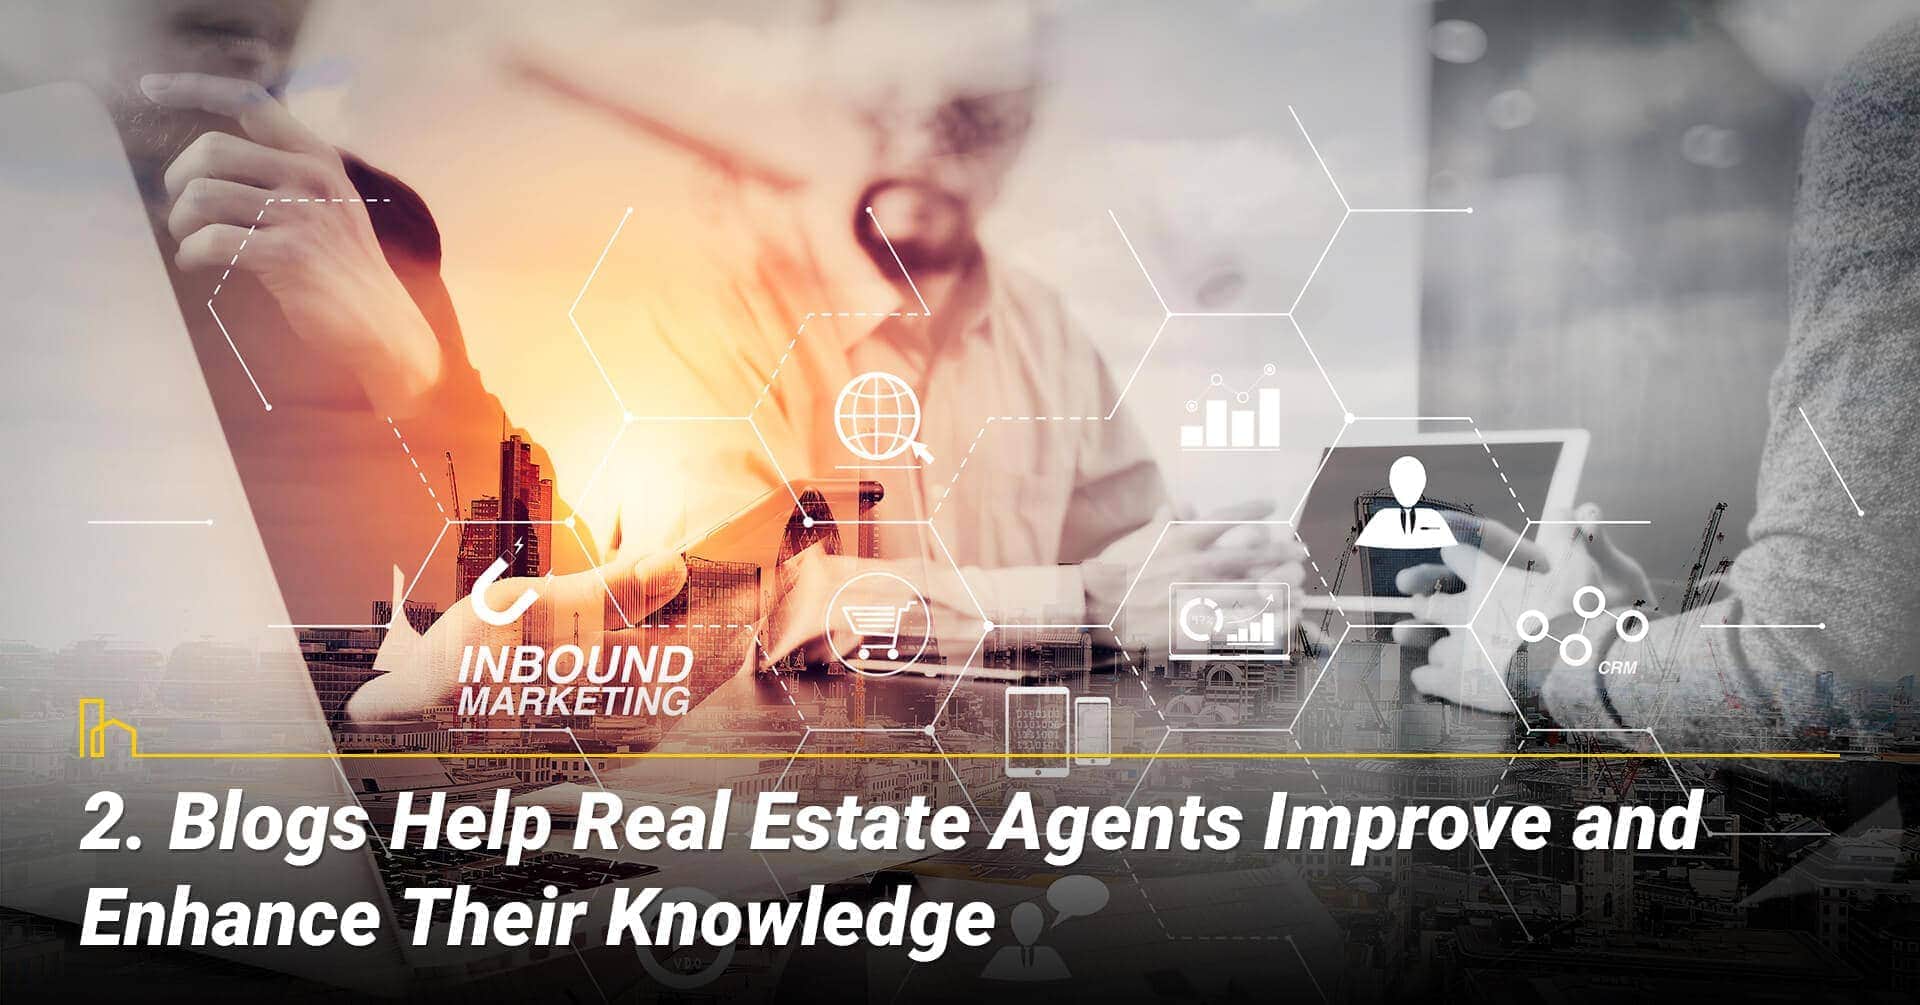 Blogs Help Real Estate Agents Improve and Enhance Their Knowledge, Agent gains knowledge via blogs